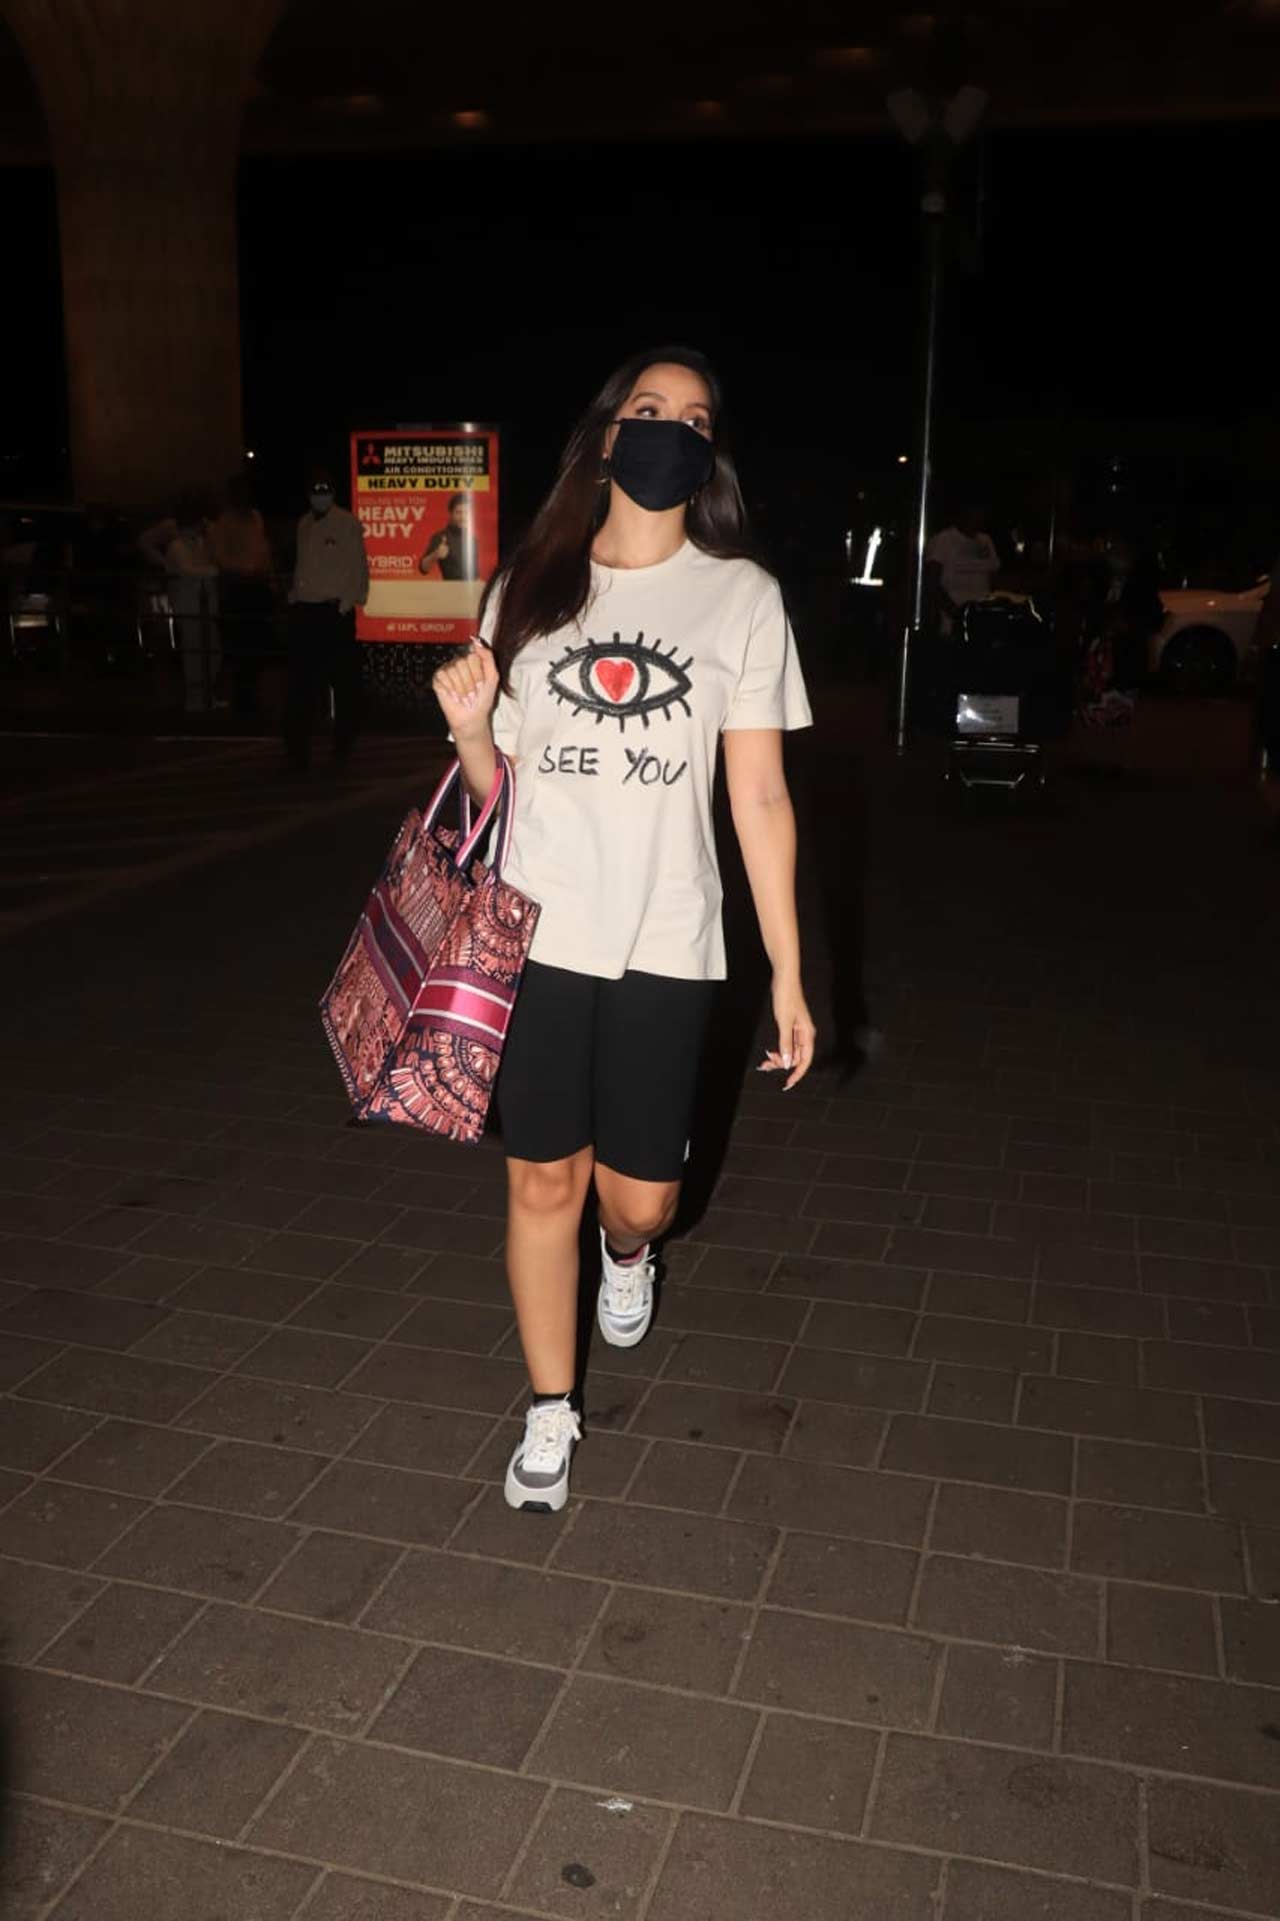 Nora Fatehi was snapped at her comfy best by the shutterbugs at the Mumbai airport. The actress opted for a beige coloured oversized t-shirt, paired with black shorts during the outing. On the work front, Nora will be next seen in Ajay Devgn' Bhuj: The Pride Of India, which also stars Sonakshi Sinha in a pivotal role among others.